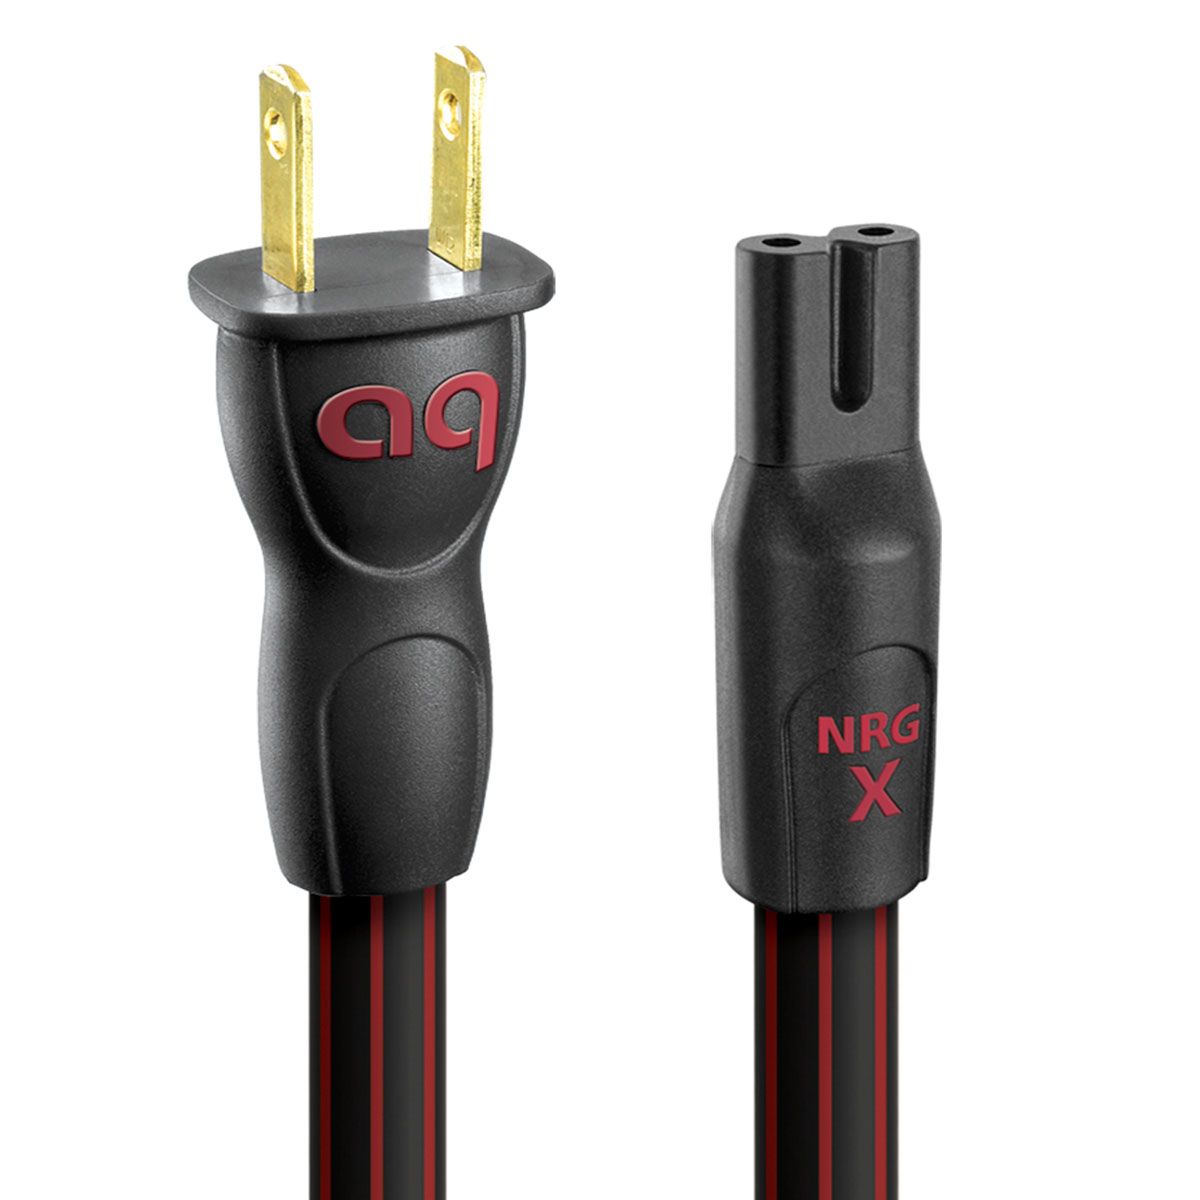 AudioQuest NRG Series Power Cables